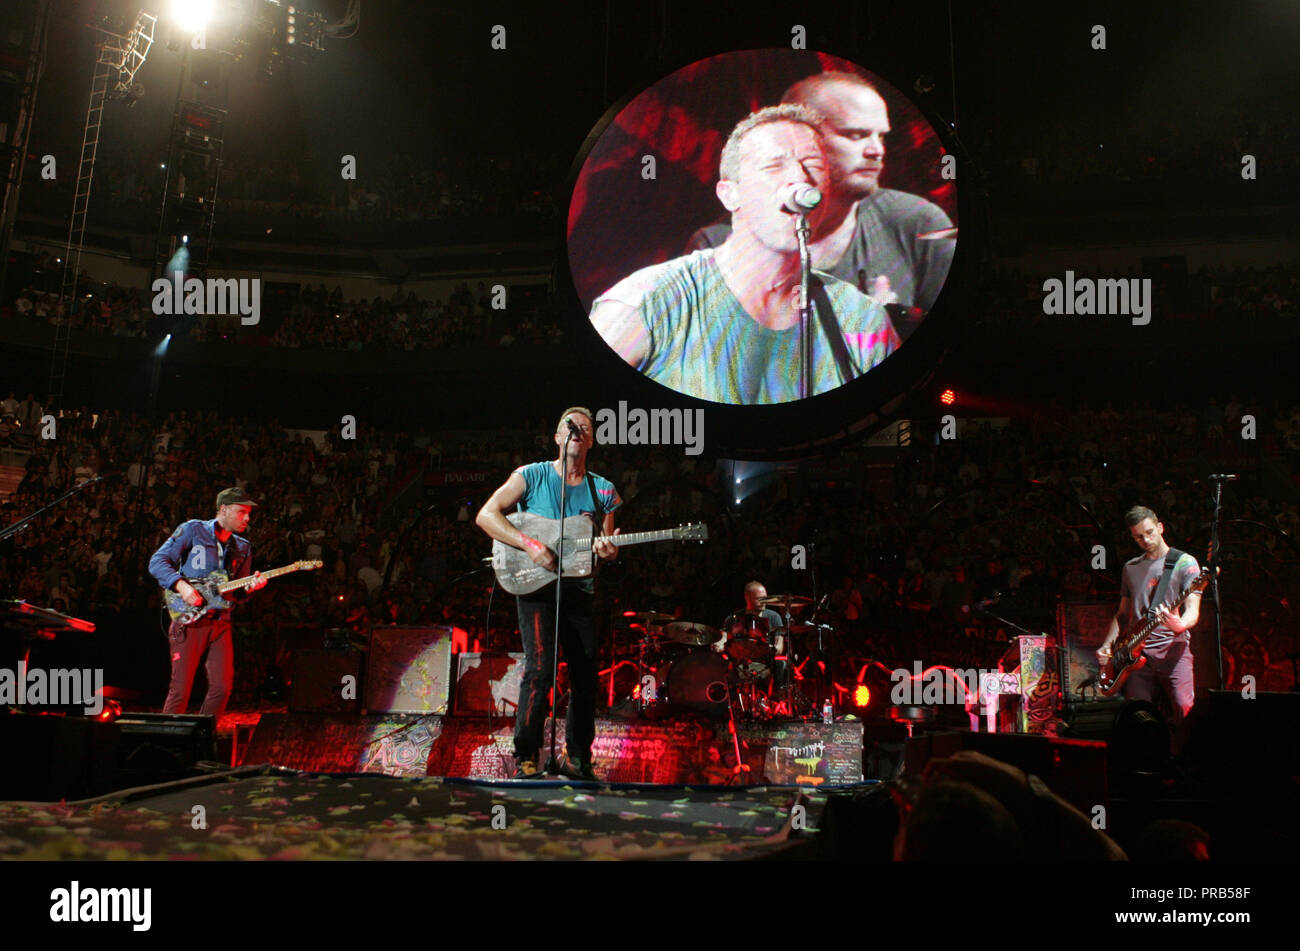 Coldplay performs in concert on their Mylo Xyloto tour 2012 at the American Airlines Arena in Miami on June 29, 2012. Stock Photo